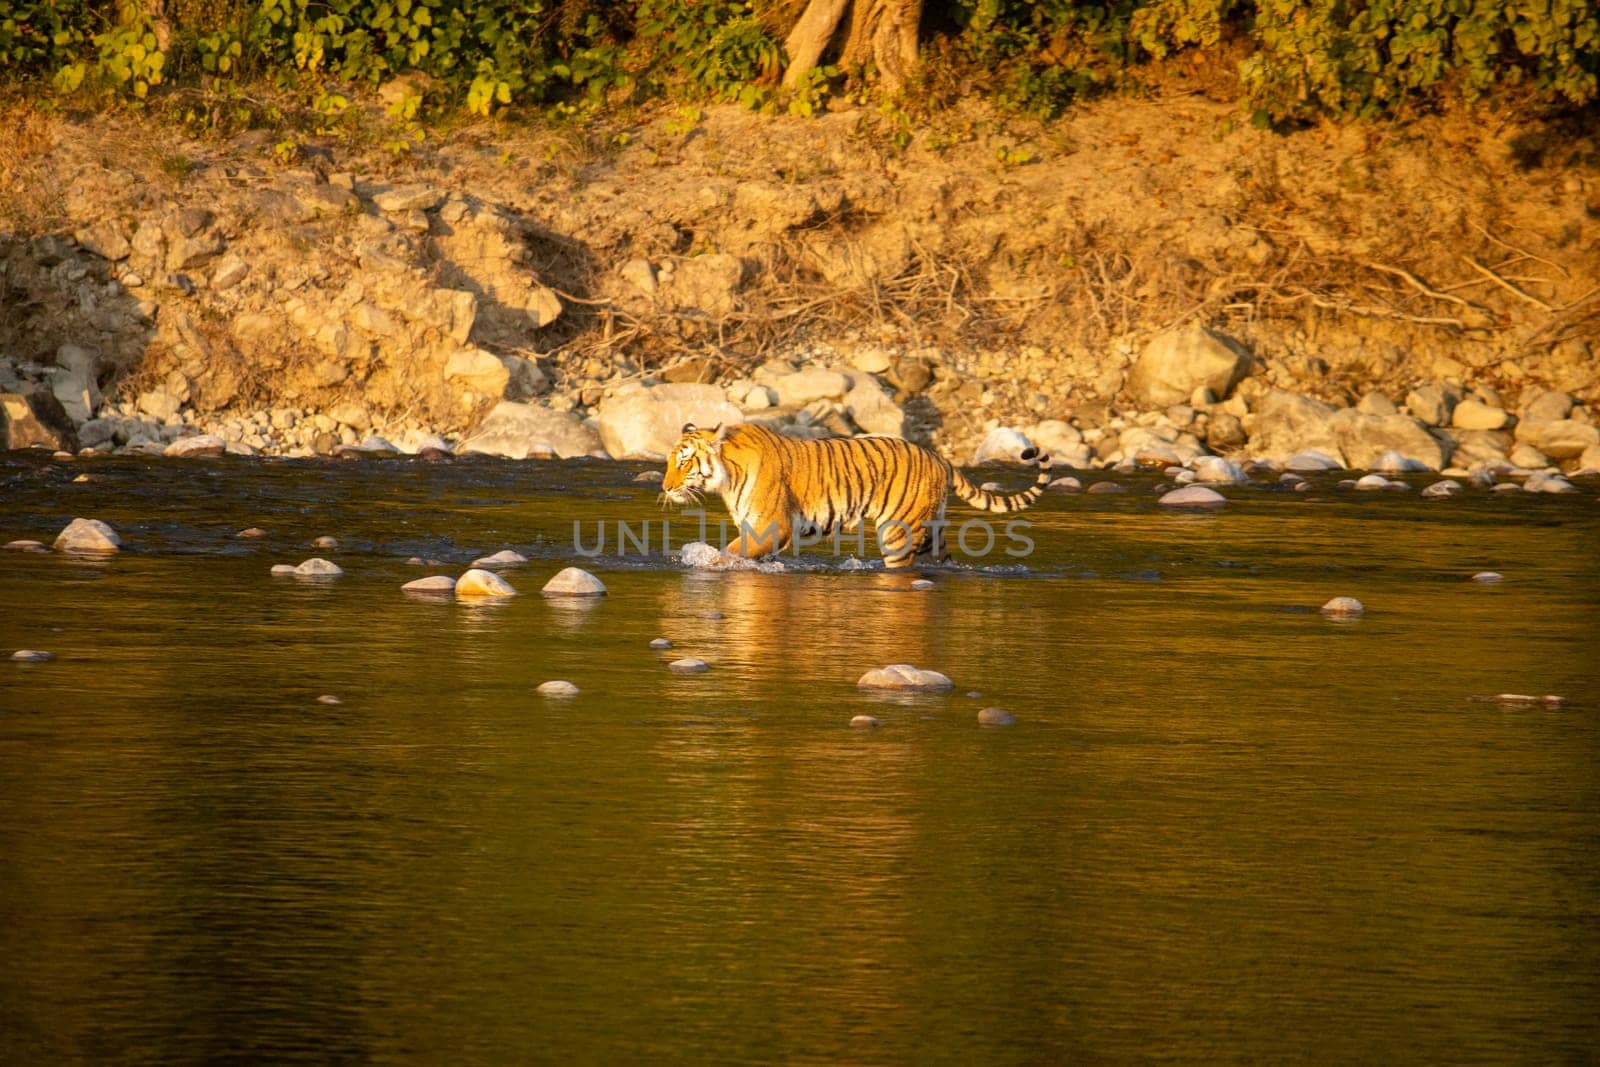 Lions Gracefully Crossing the River in Uttarakhand by stocksvids